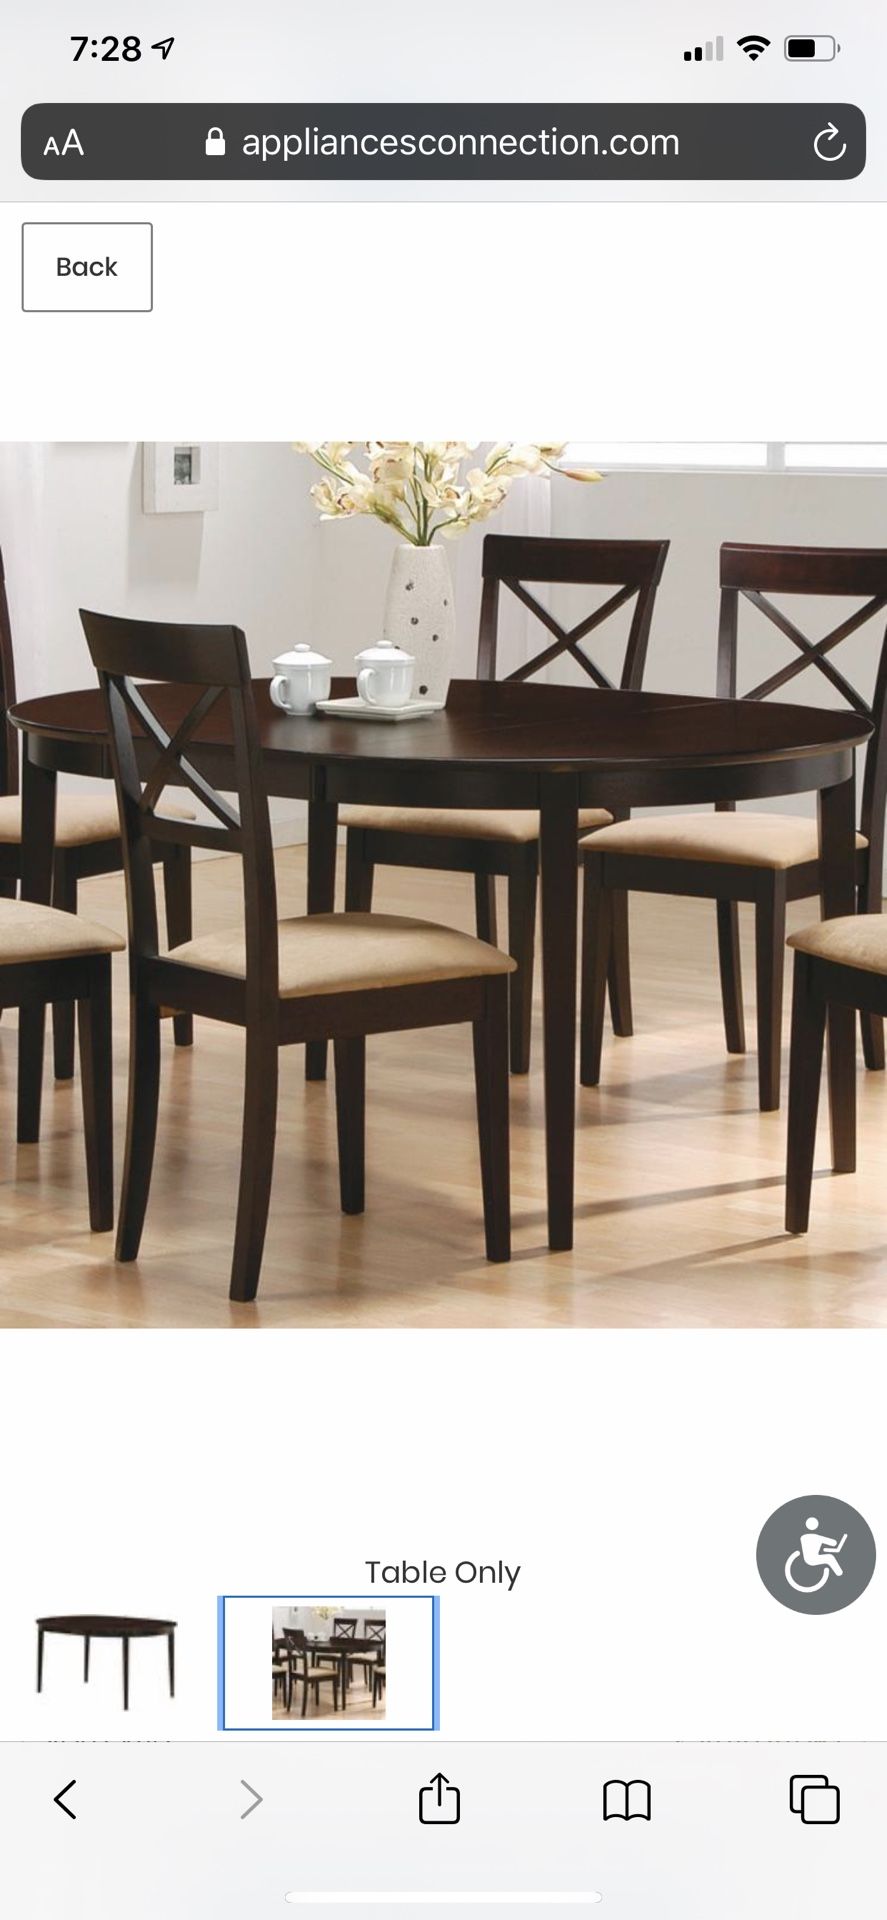 BRAND NEW! STILL IN BOX! Cappuccino Dining Table- Chairs not included